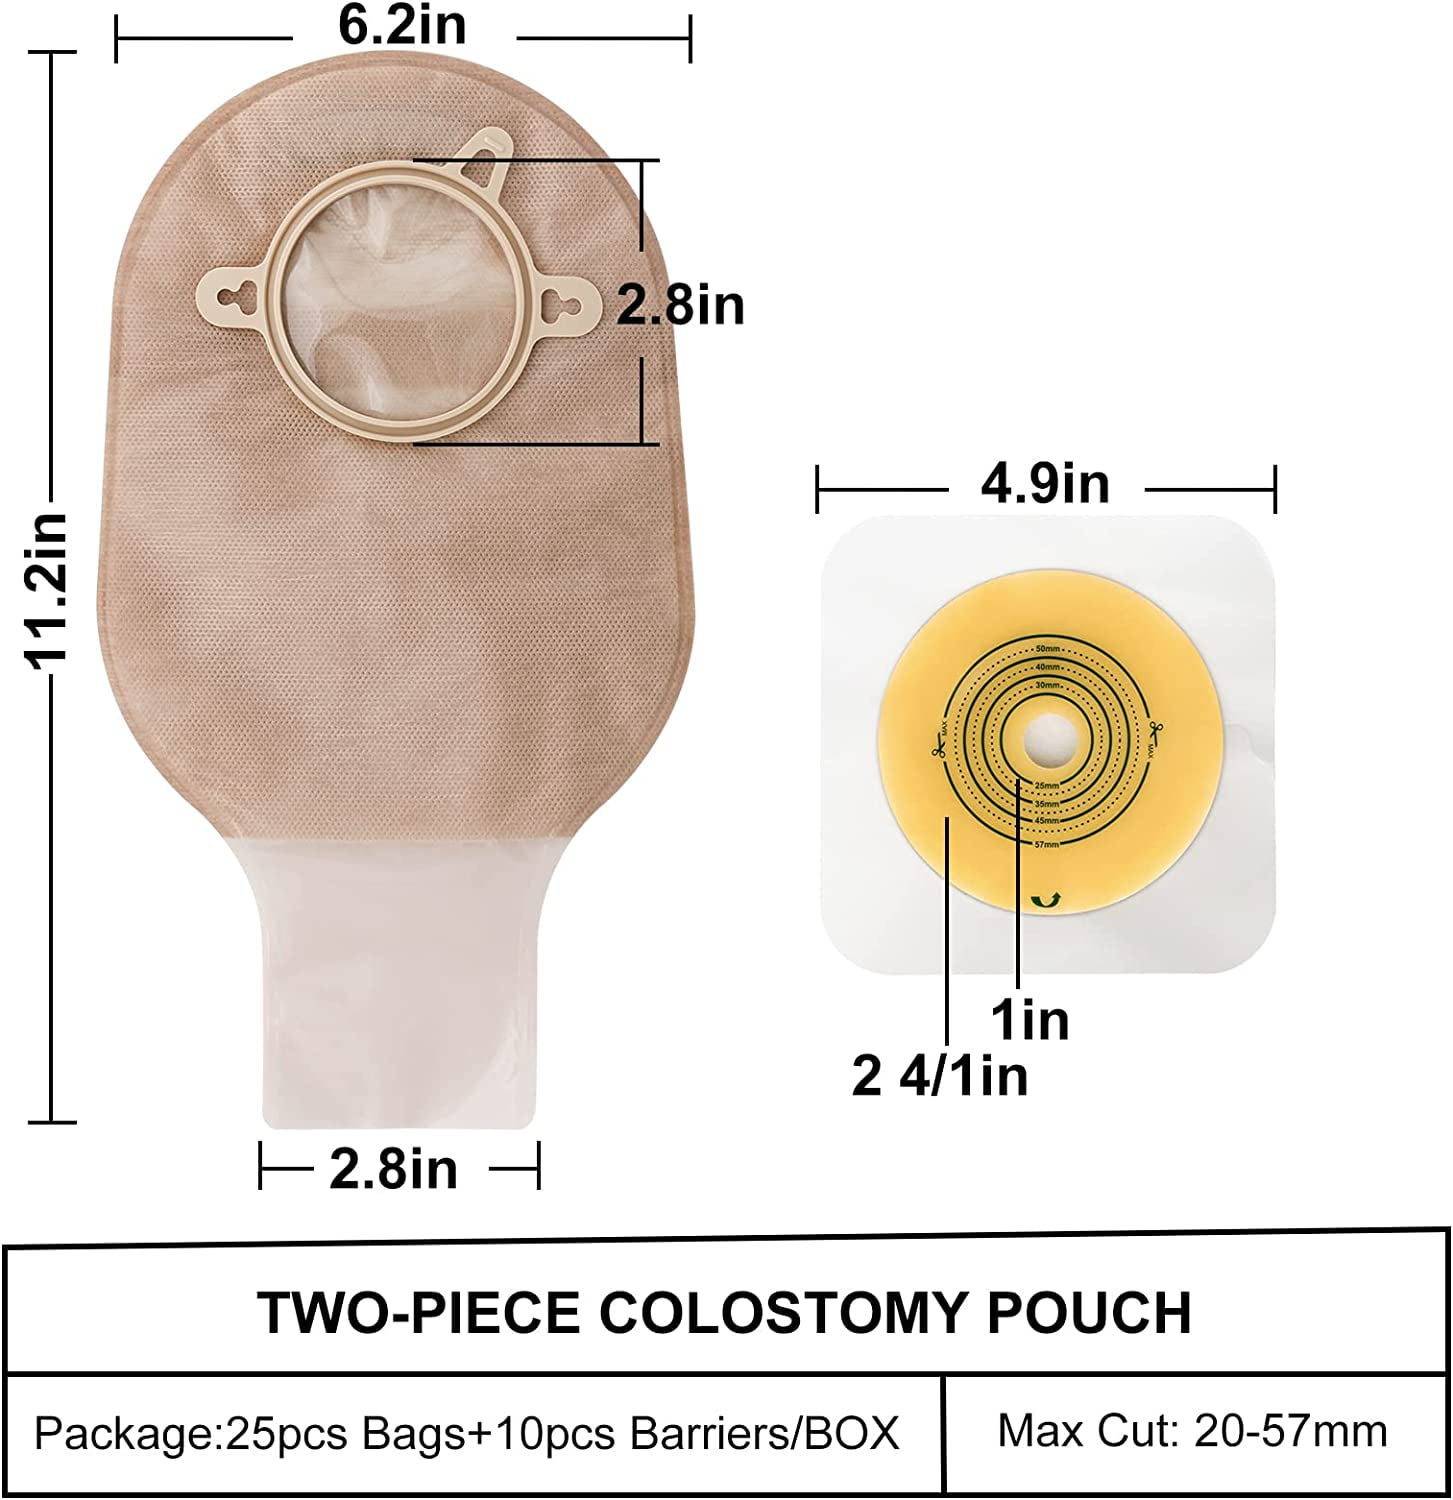 Black Elastic Ostomy Bag Cover, Ileostomy Cover, Adjustable Colostomy Bag  Cover, Stoma Pouch Cover 6